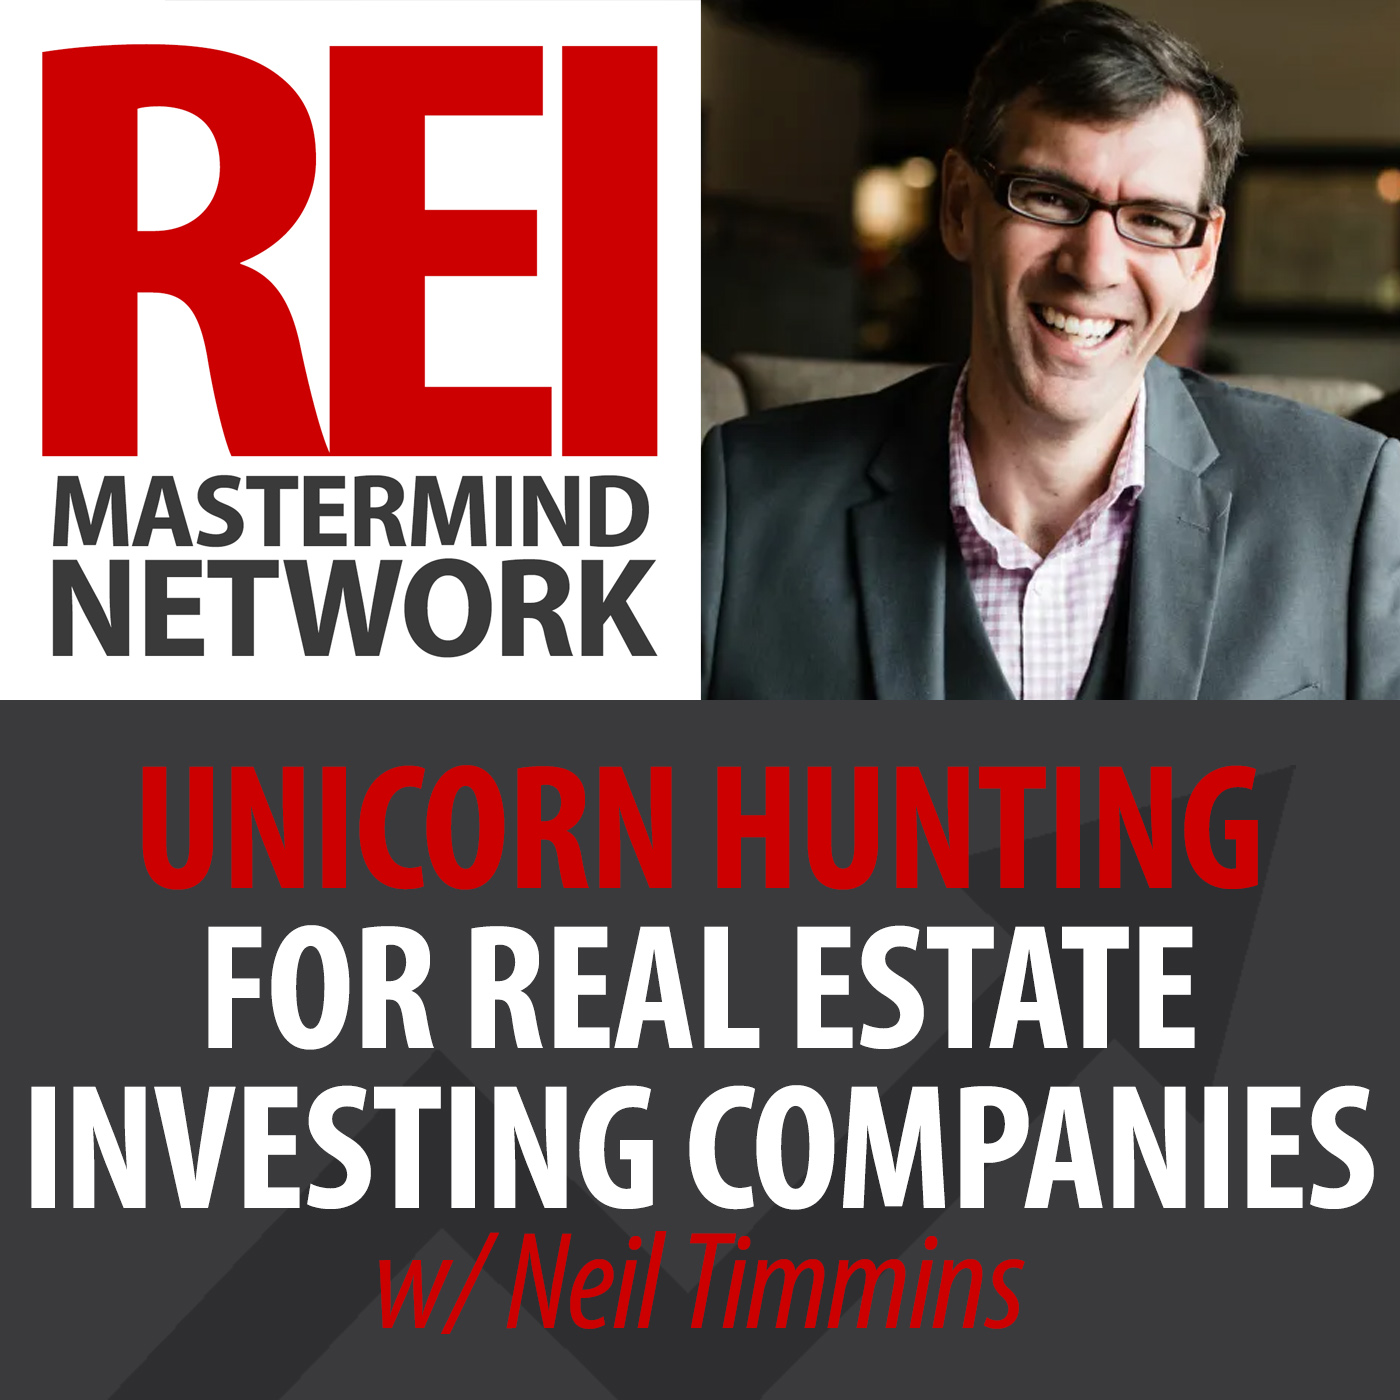 Unicorn Hunting for Real Estate Investment Companies with Neil Timmins Image